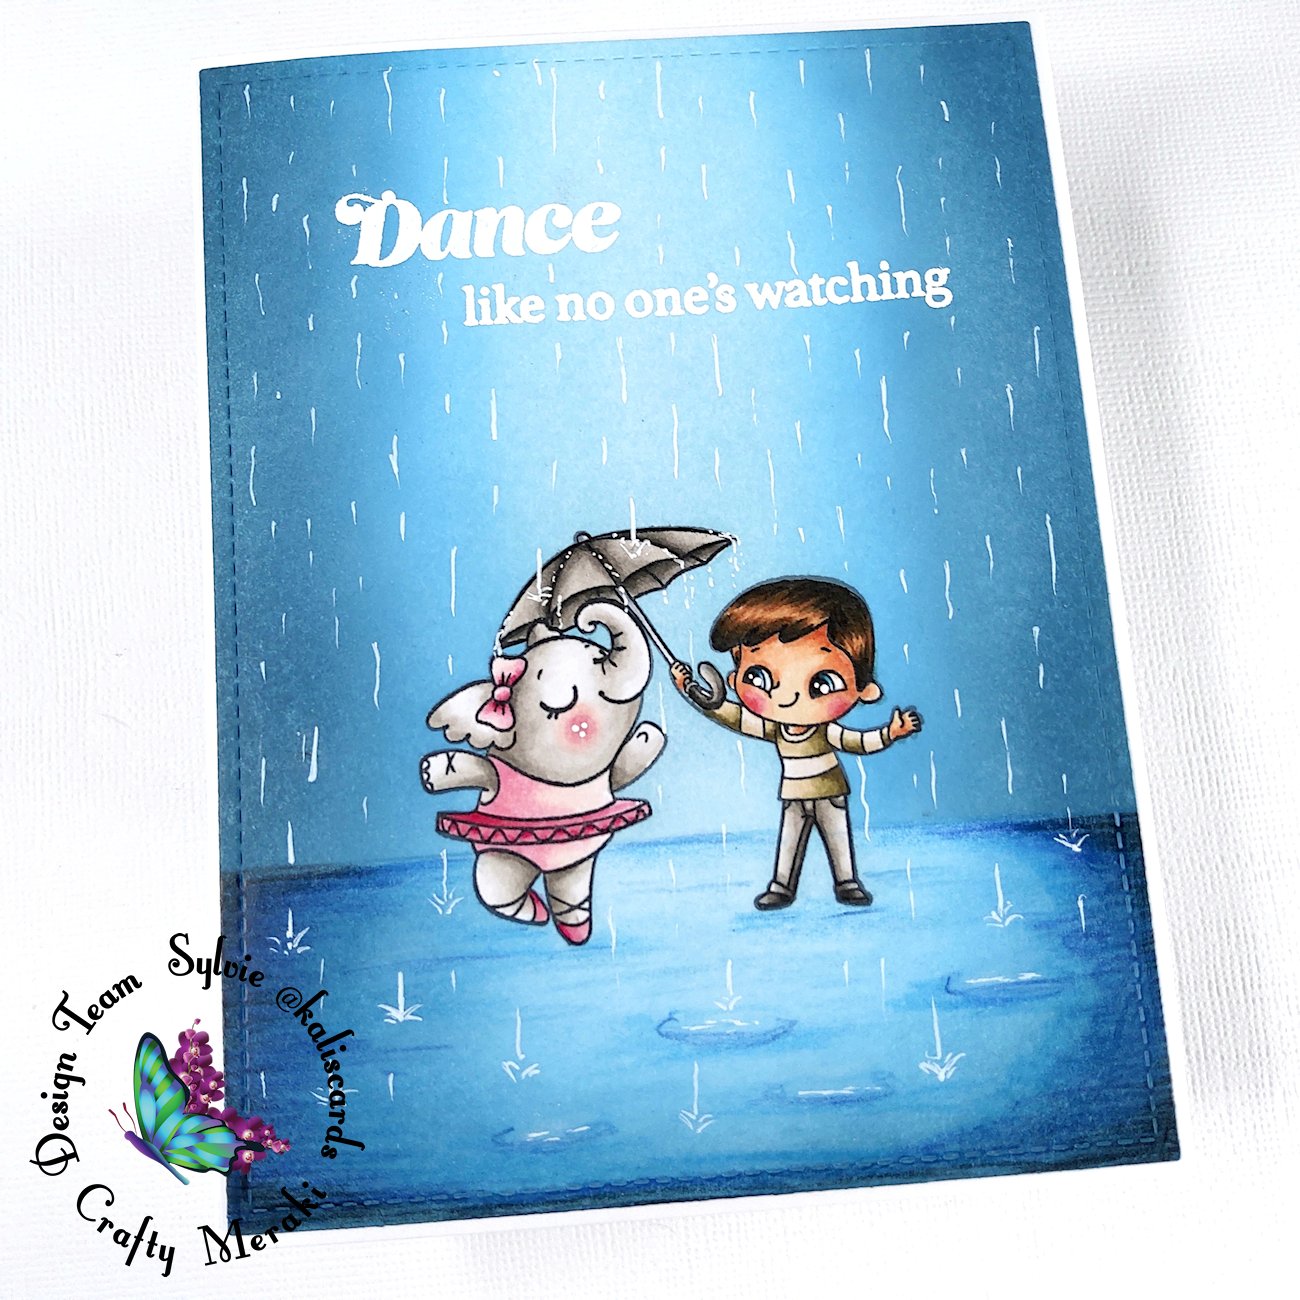 Dance like no one's watching by Sylvie @Kaliscards